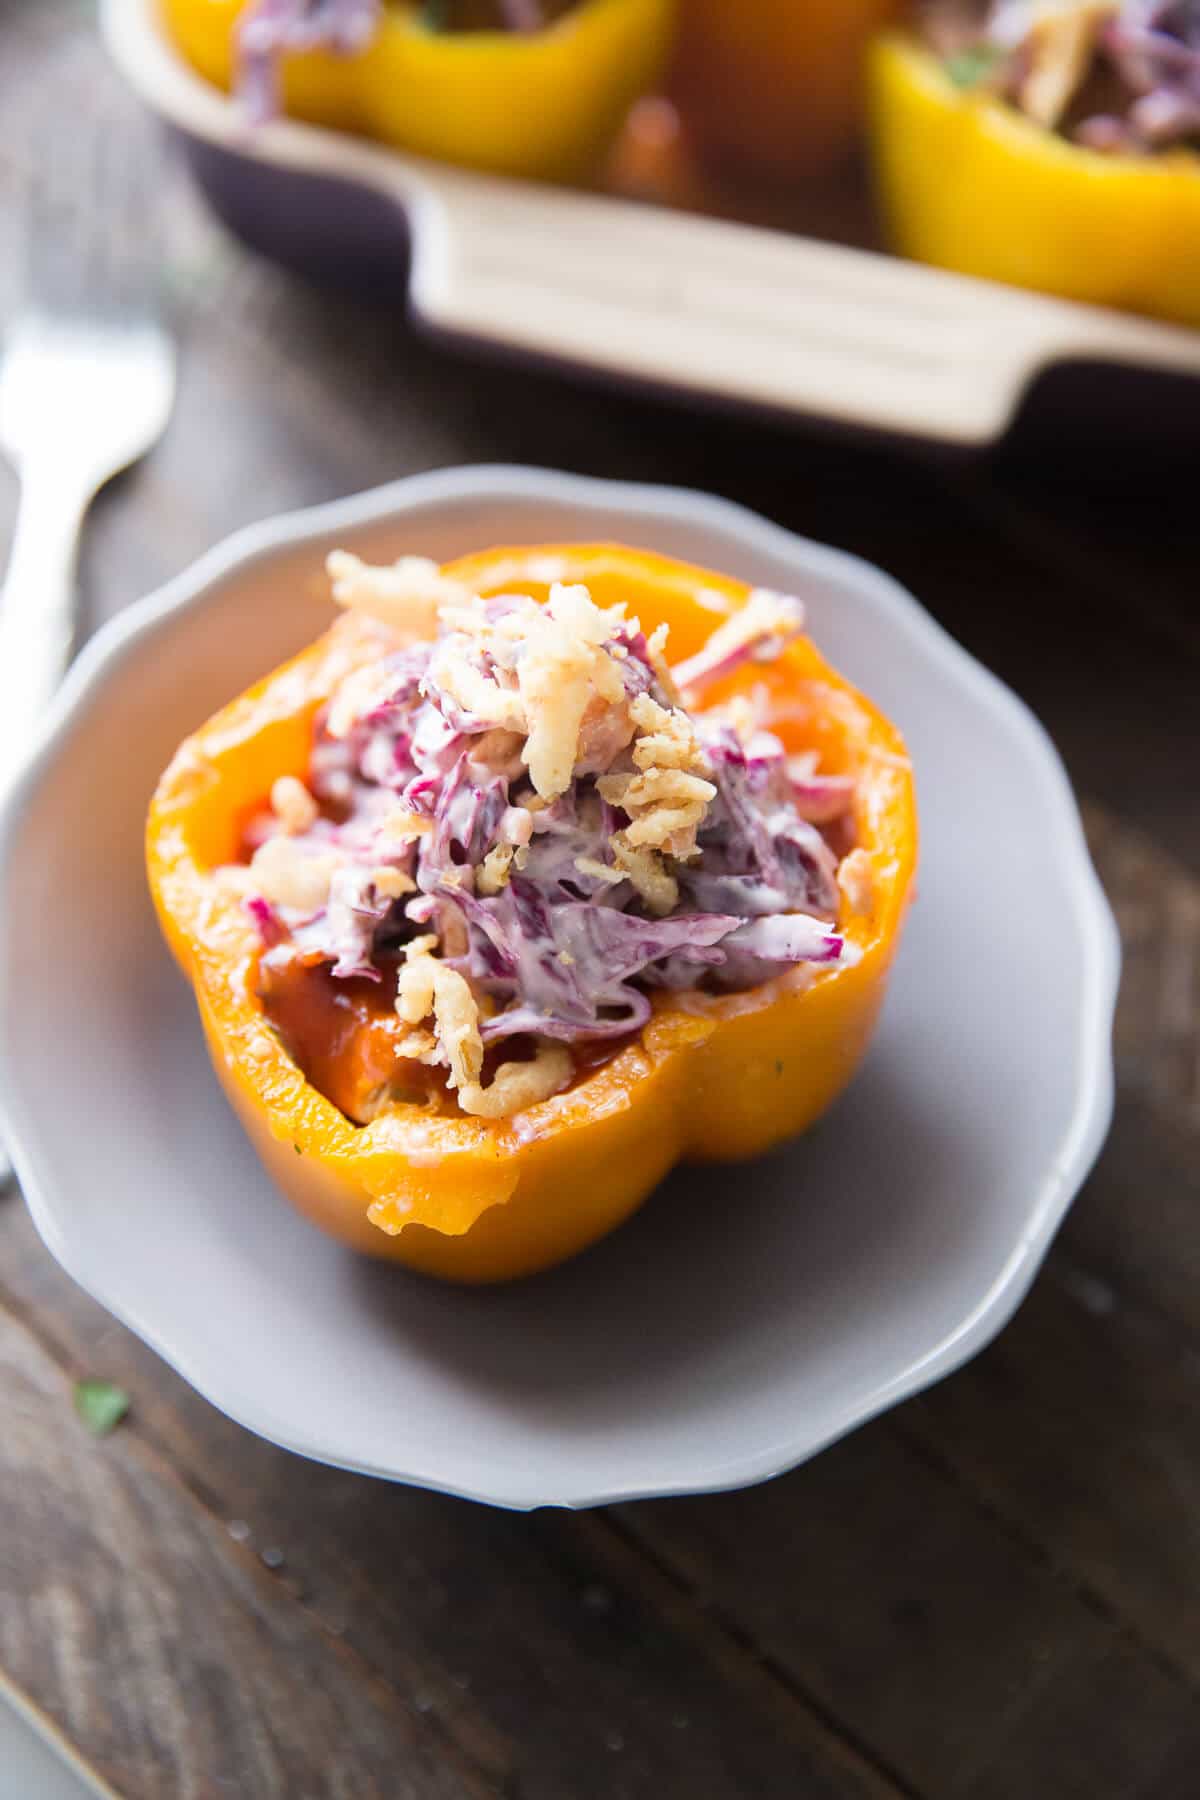 Southwest Stuffed peppers are filled with BBQ brisket and topped with a tangy slaw! The colors and the flavor pop!